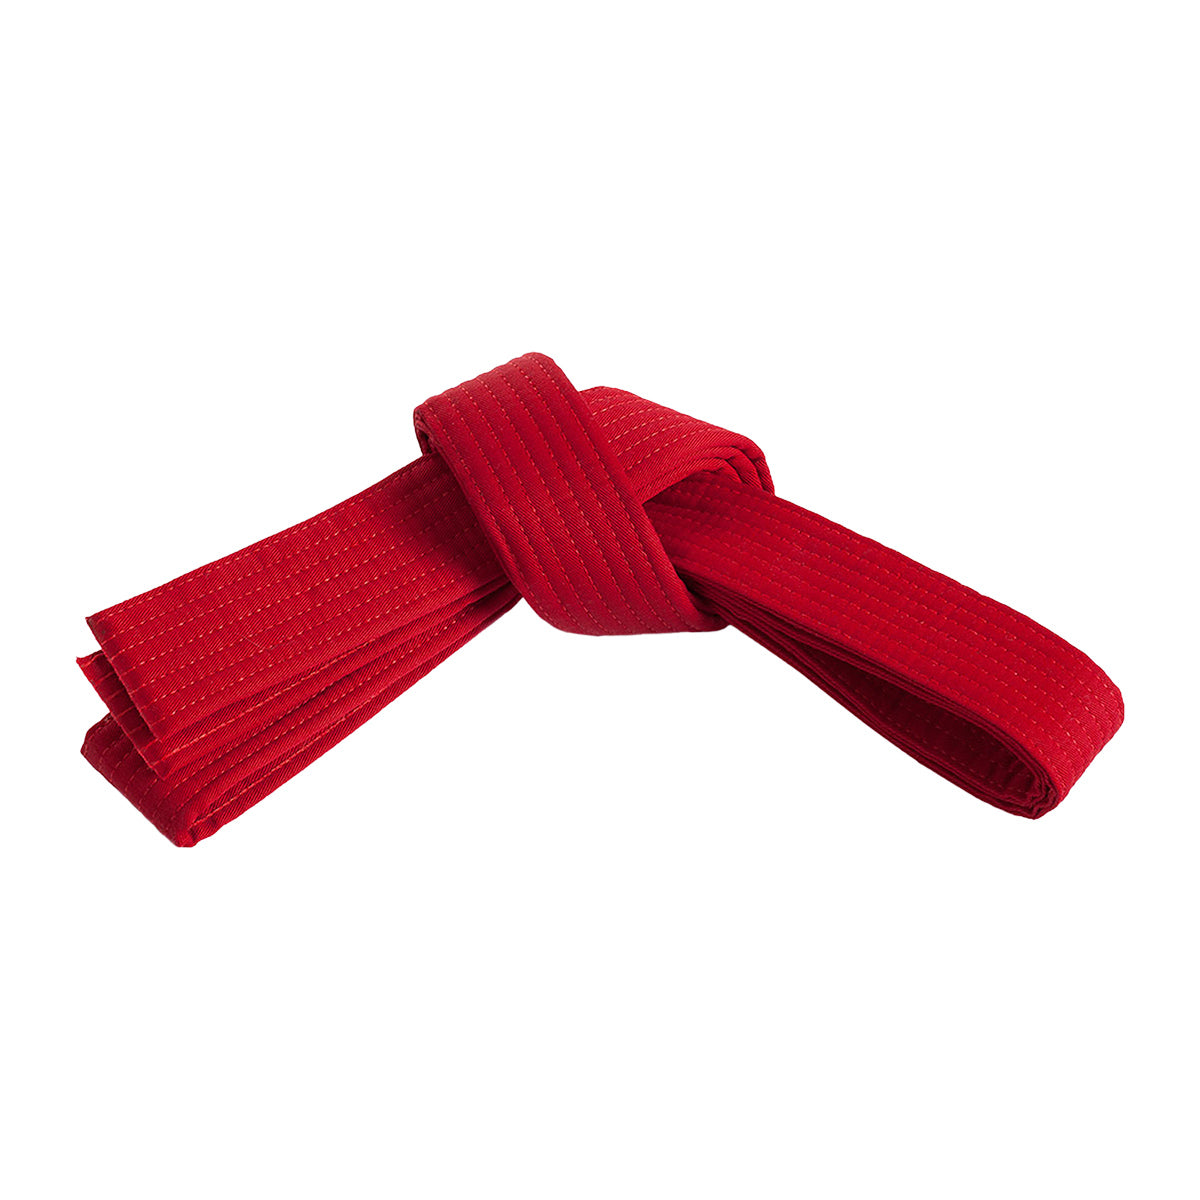 Double Wrap Solid Belt Red